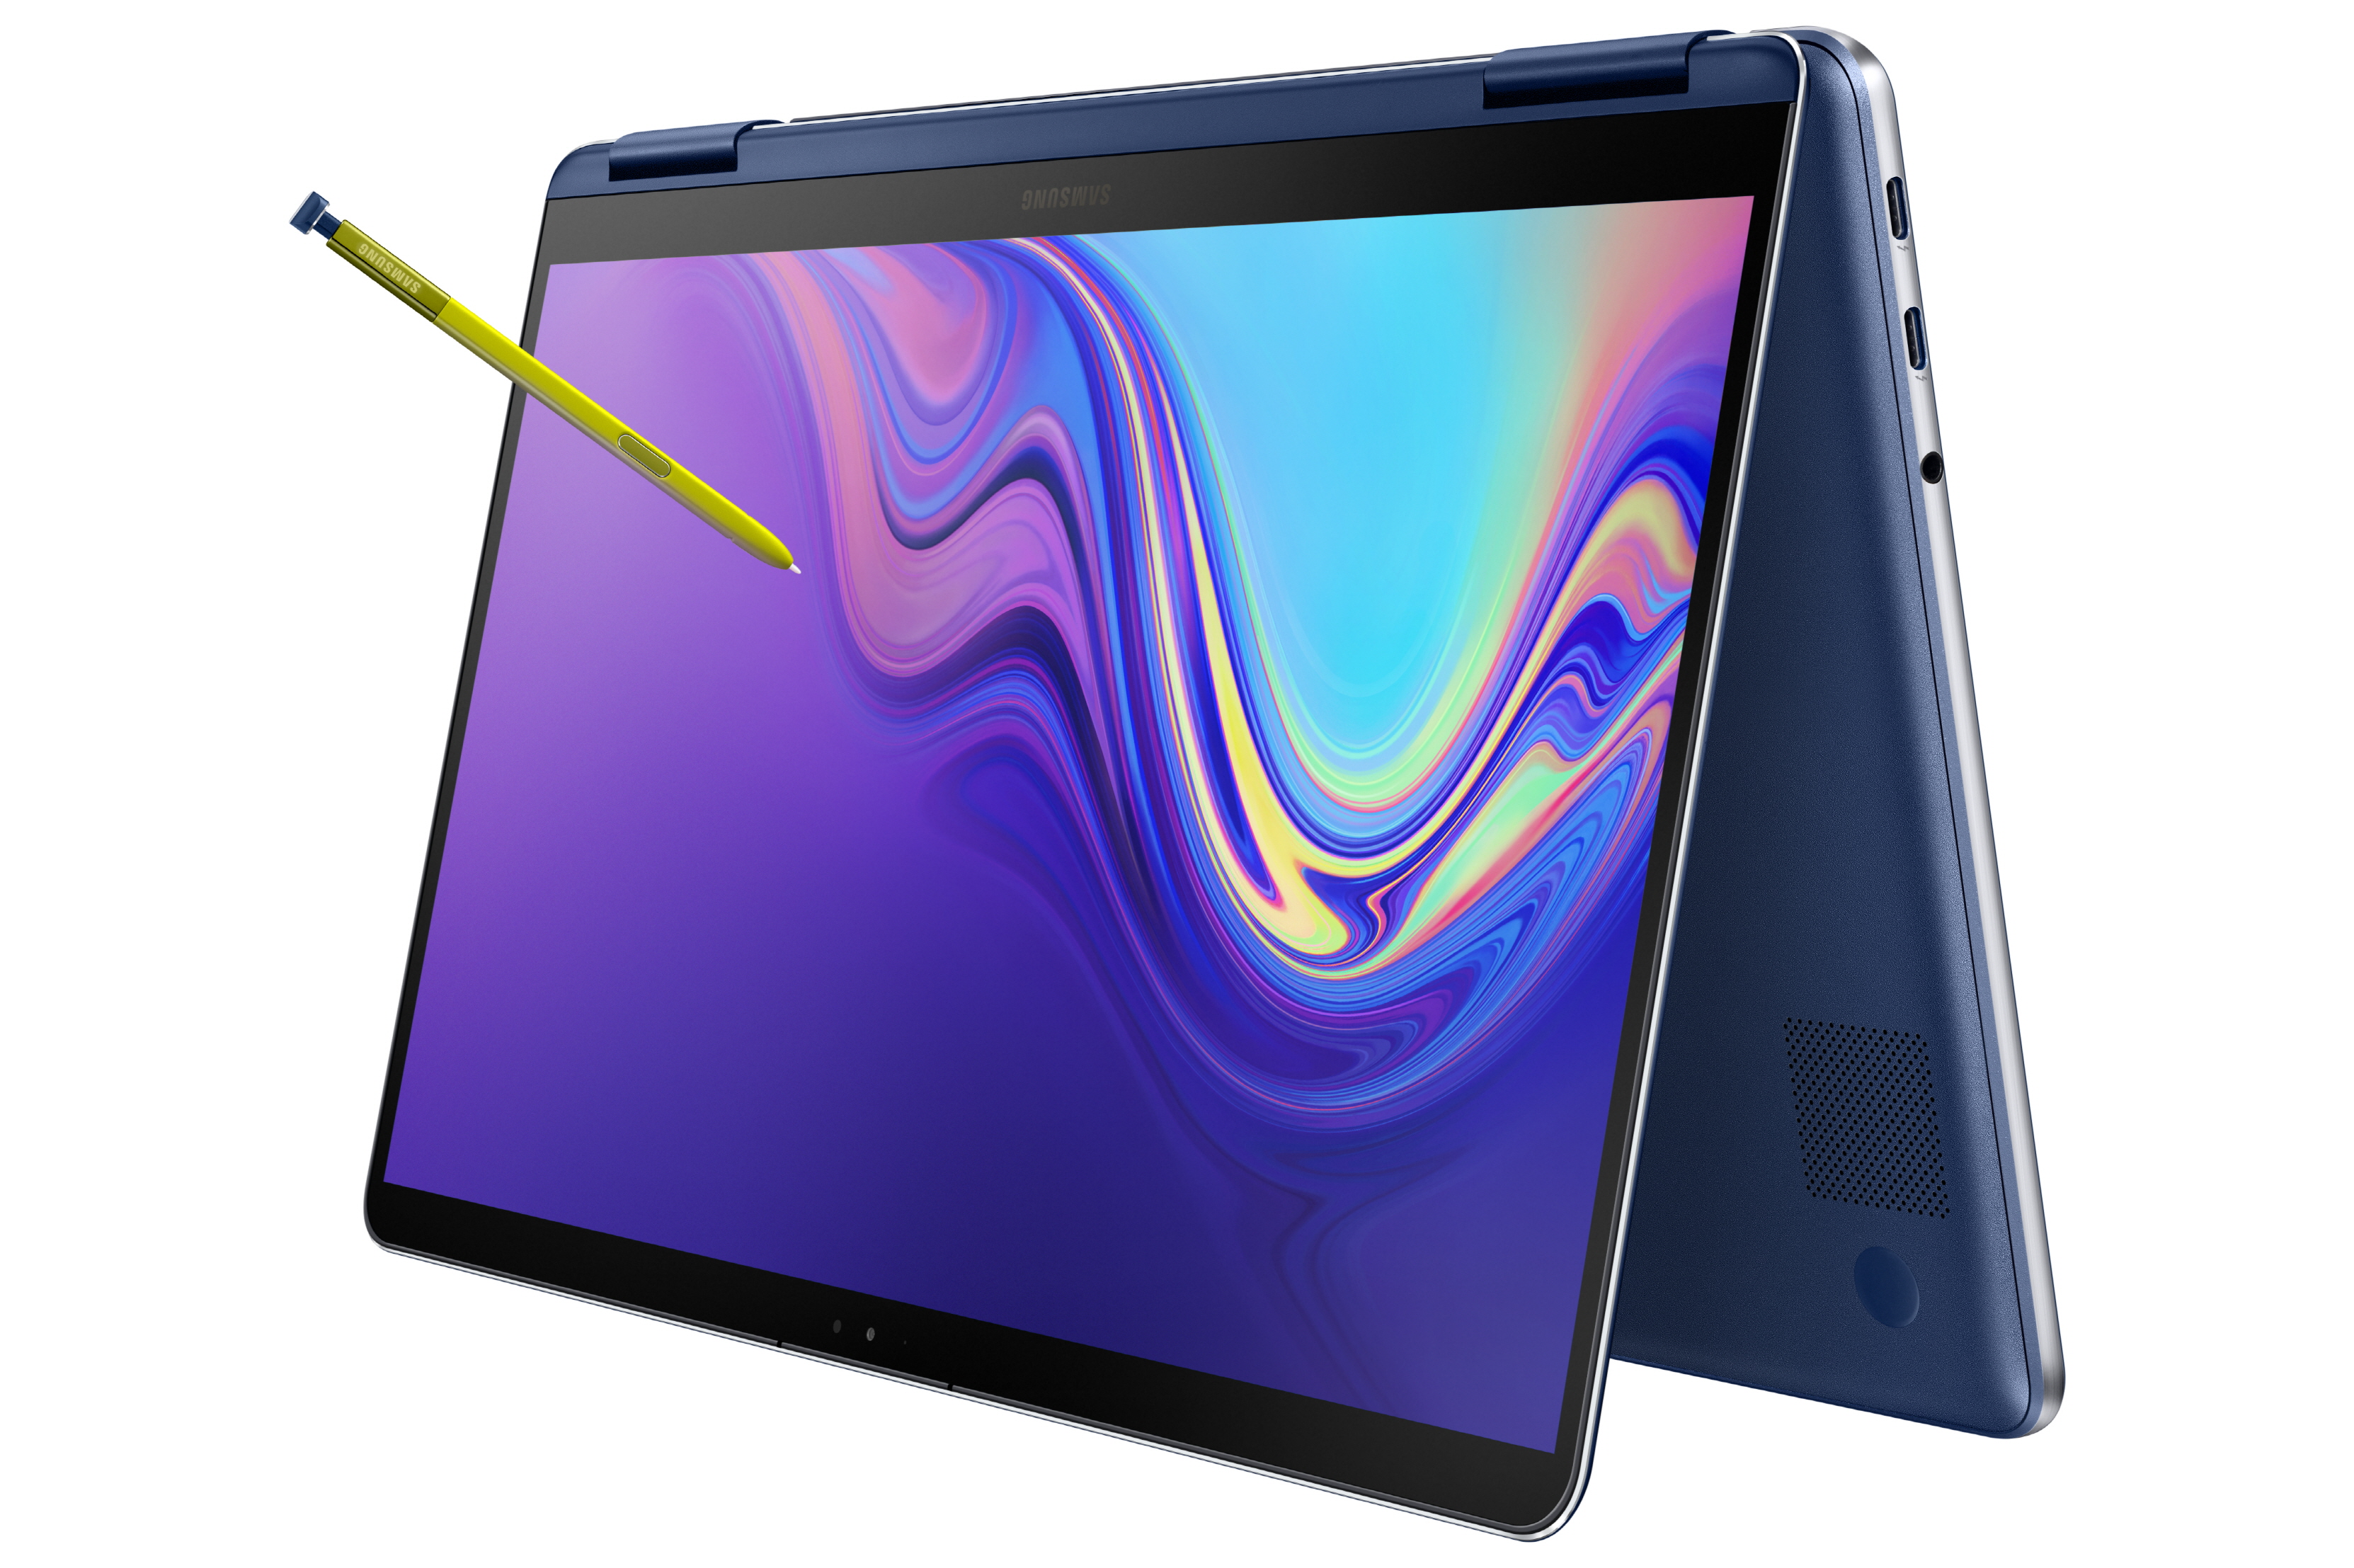 samsung announces notebook 9 pen pr nt950sbe 031 dyanmic 8 with s blue